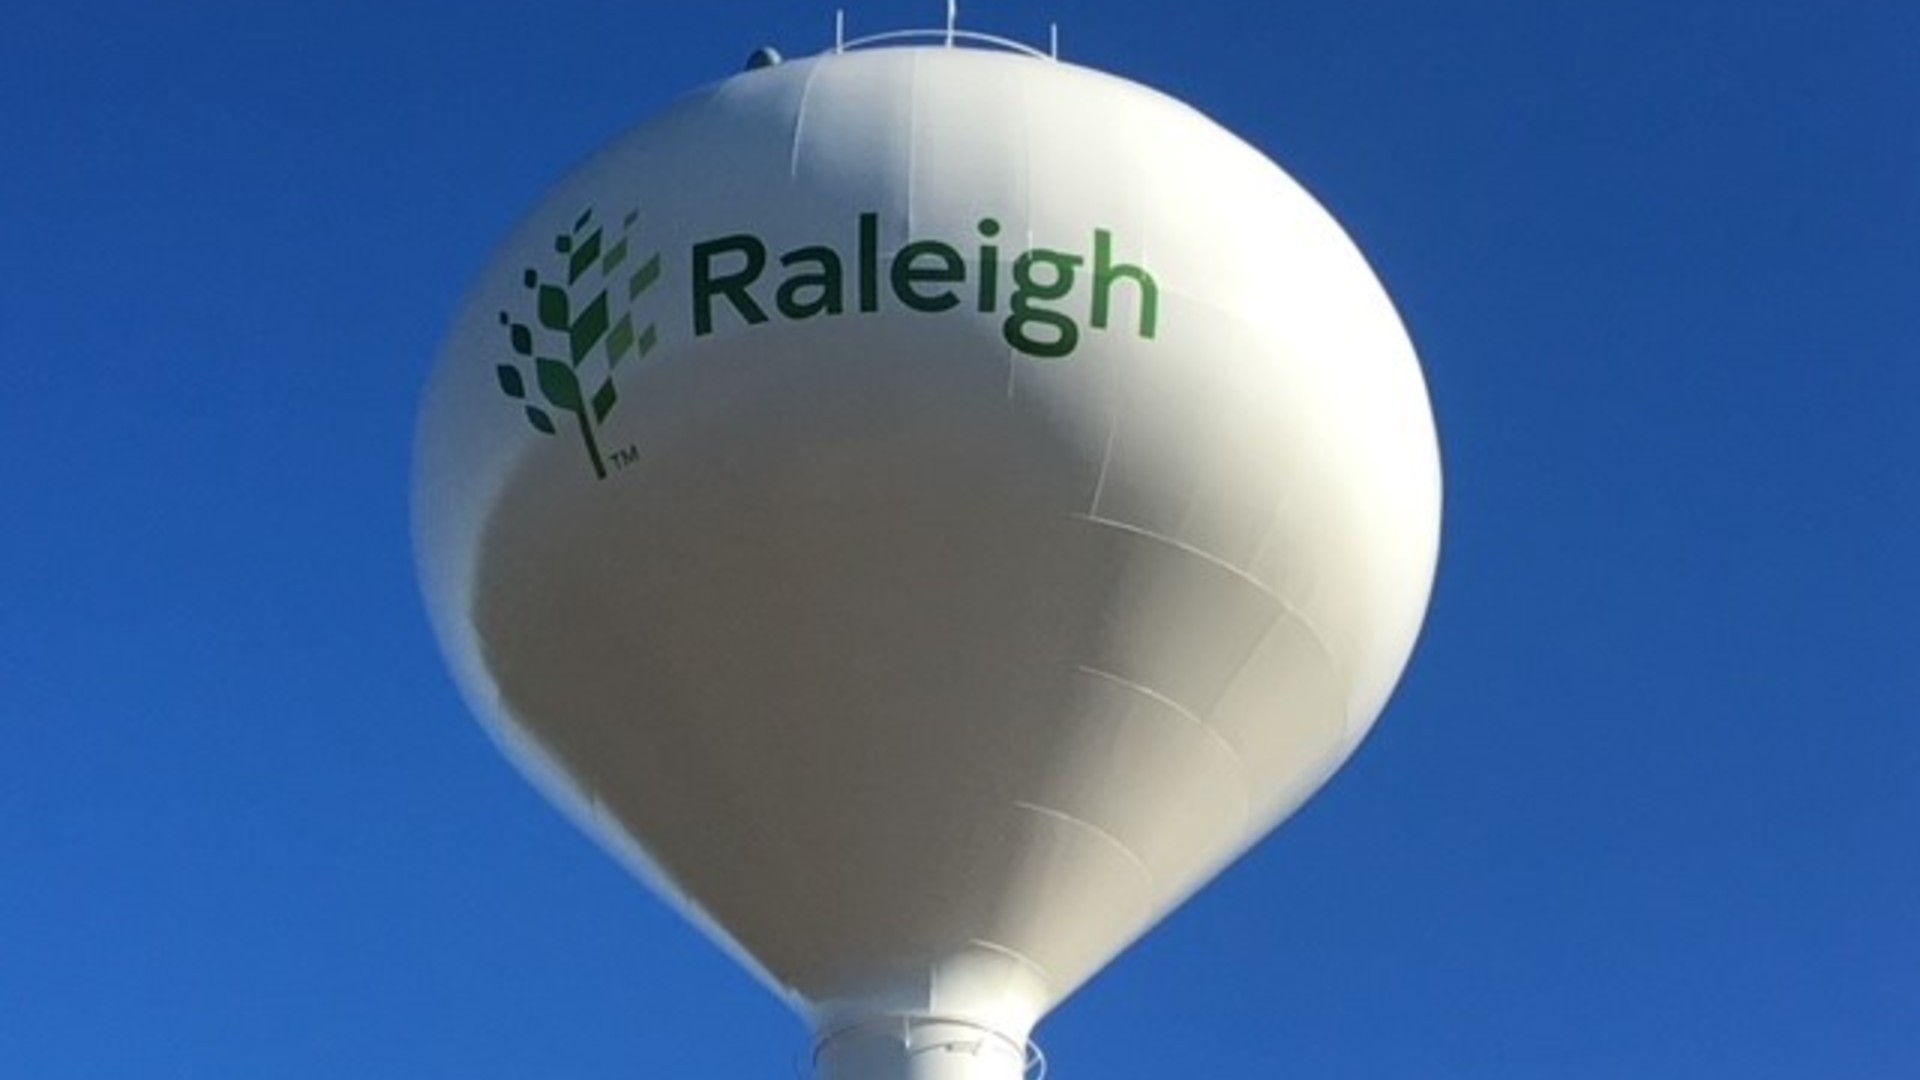 Drone picture of City of Raleigh branded water tower.